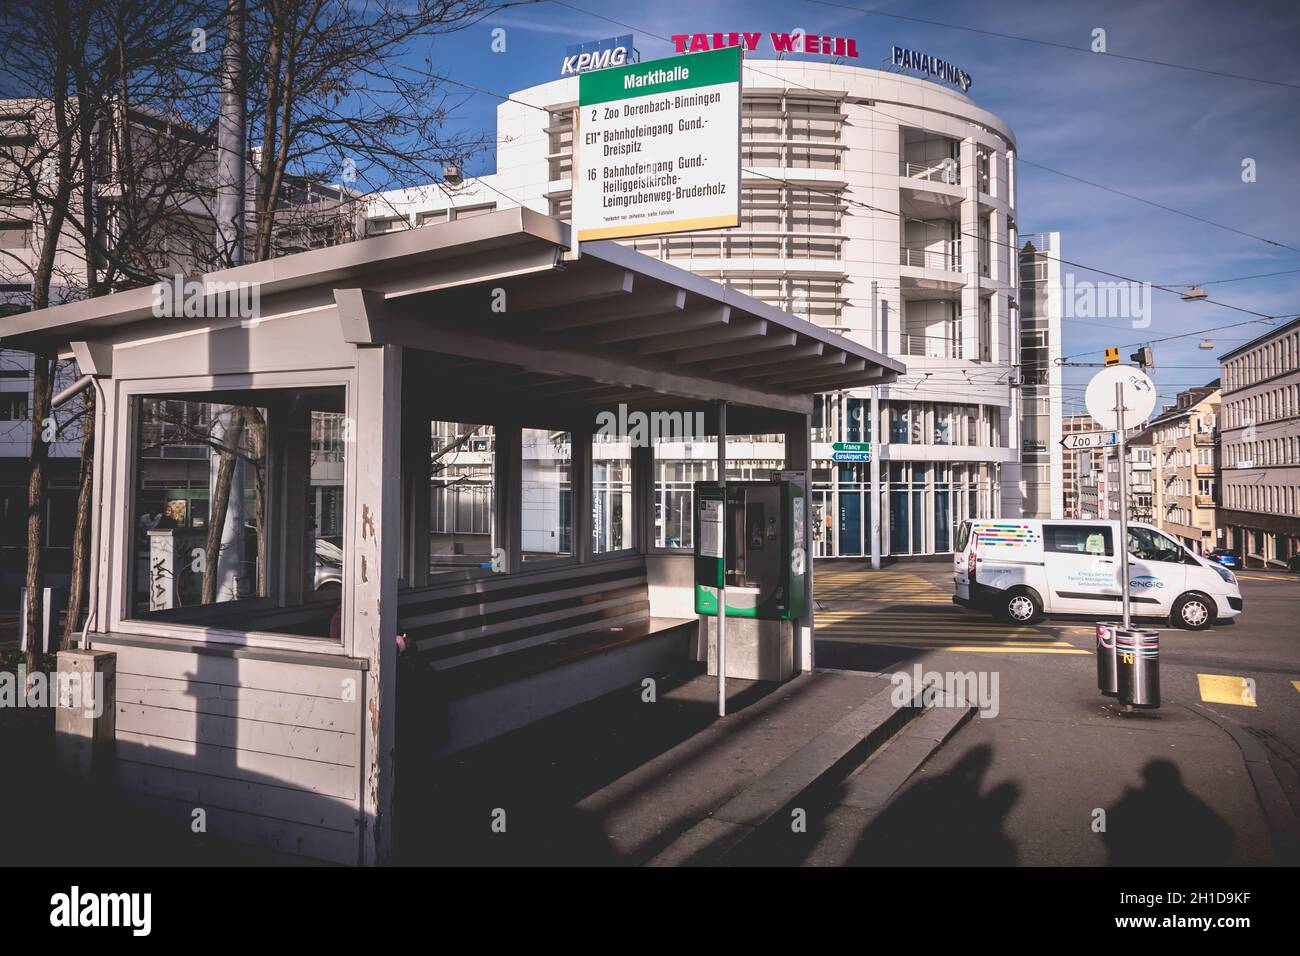 Basel, Switzerland - December 25, 2017: View of a bus stop for lines 2 E11 and 16 in the city center on a winter day Stock Photo